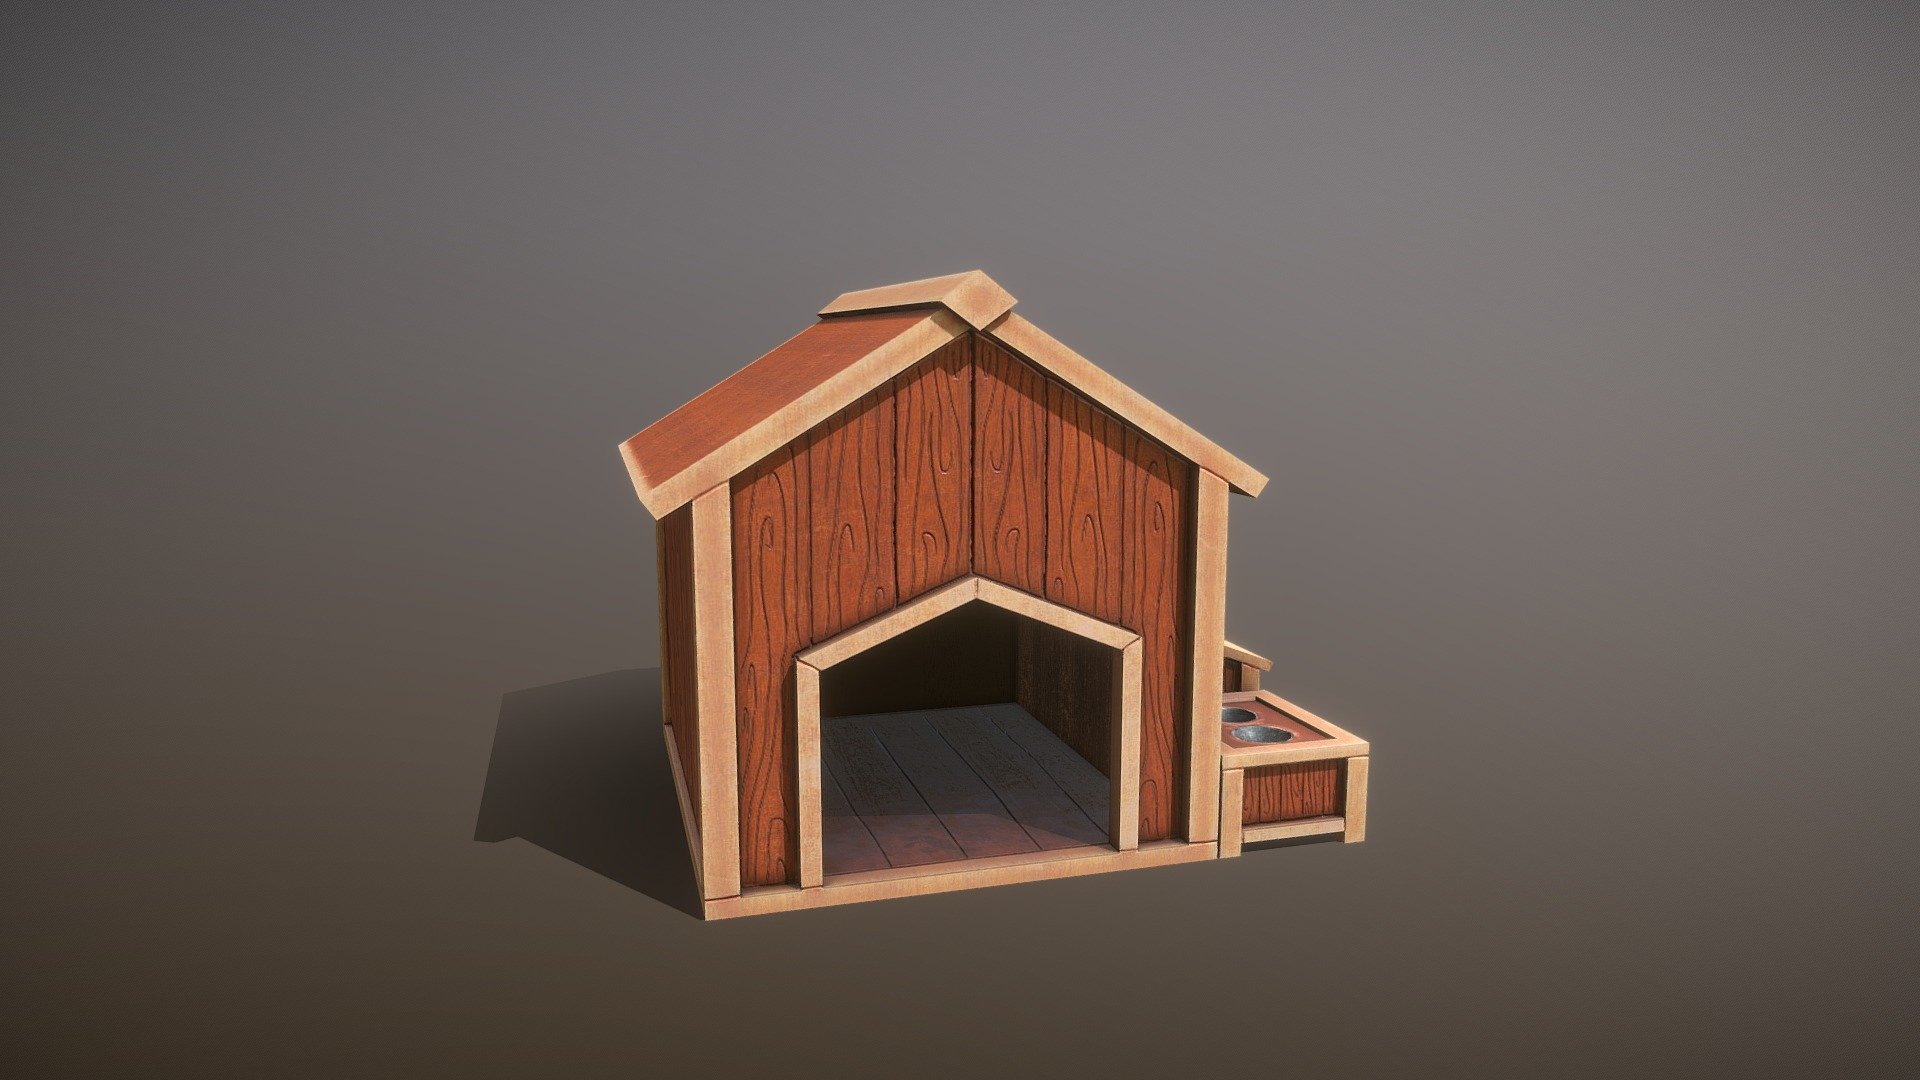 This is a selfmade, handpainted dog house made for an educational project.

It includes wood textures and 2 metal bowls.

Technical details:

File formats included in the package are: FBX

Native software file format: BLEND

Textures: Wood, Metal, Handpainted

All textures are 2k resolution

All files are in the 7z file 3d model